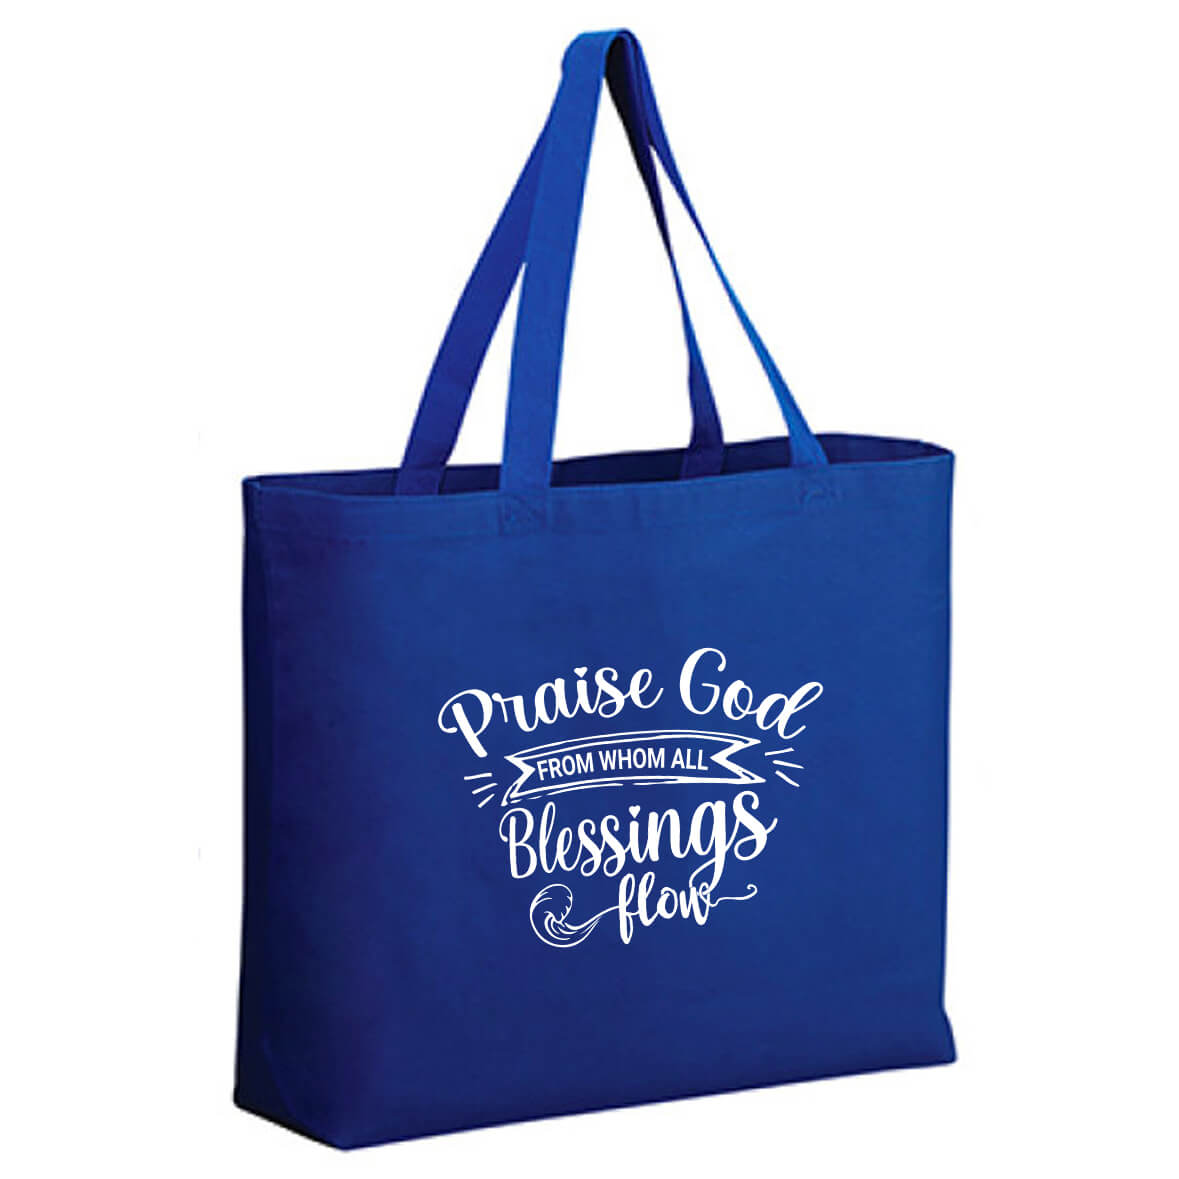 Praise God From Whom All Blessings Flow Jumbo Tote Canvas Bag